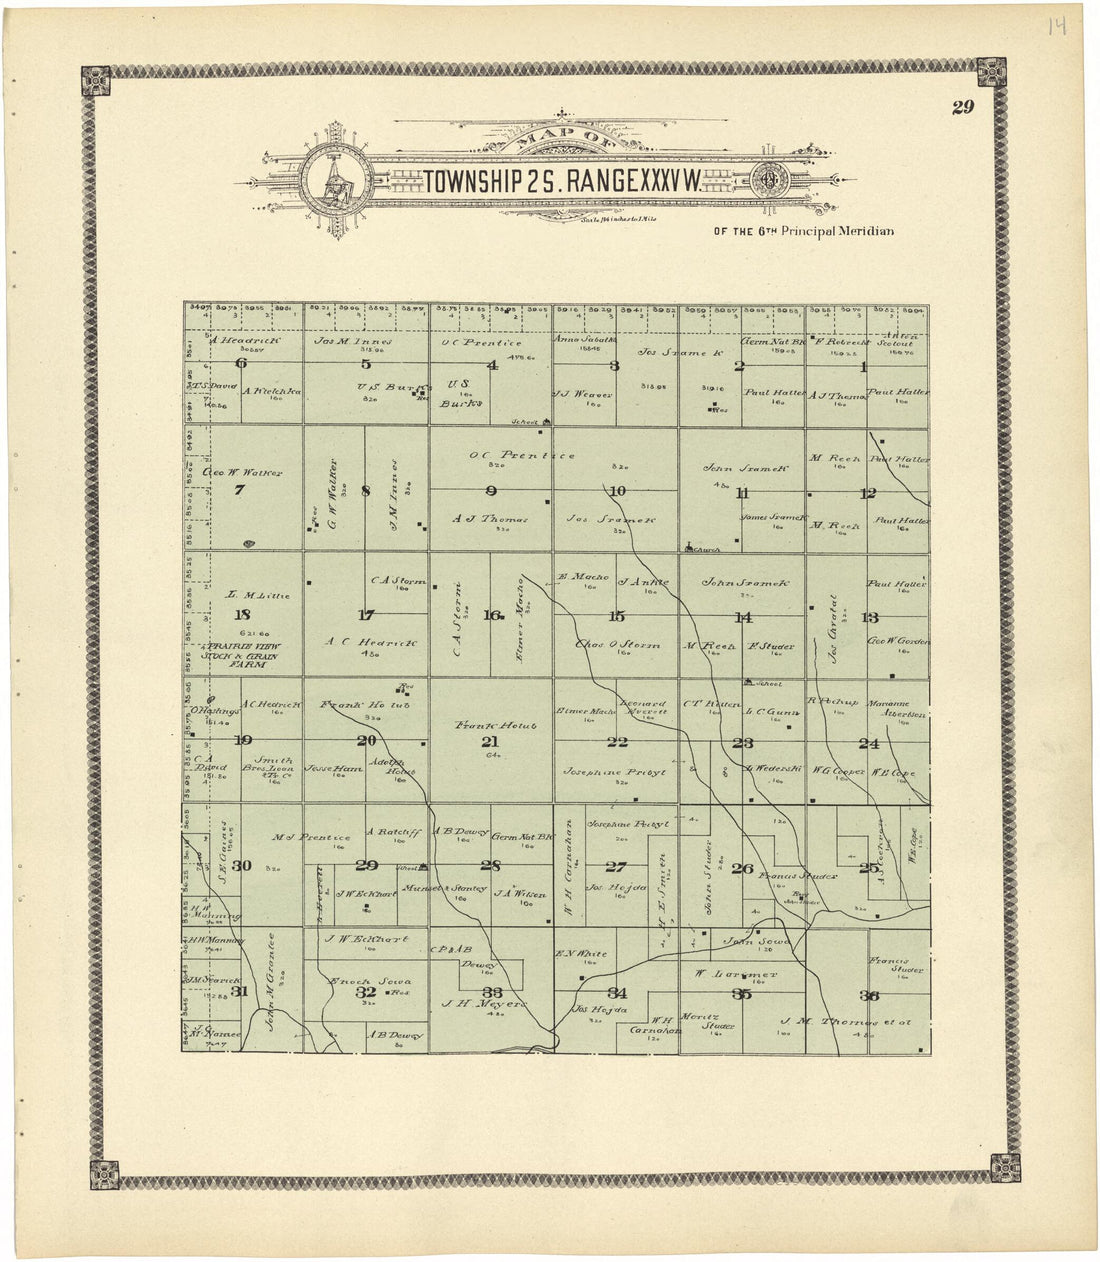 This old map of Map of Township 2 S. Range XXXV W. from Standard Atlas of Rawlins County, Kansas from 1906 was created by  Geo. A. Ogle &amp; Co in 1906